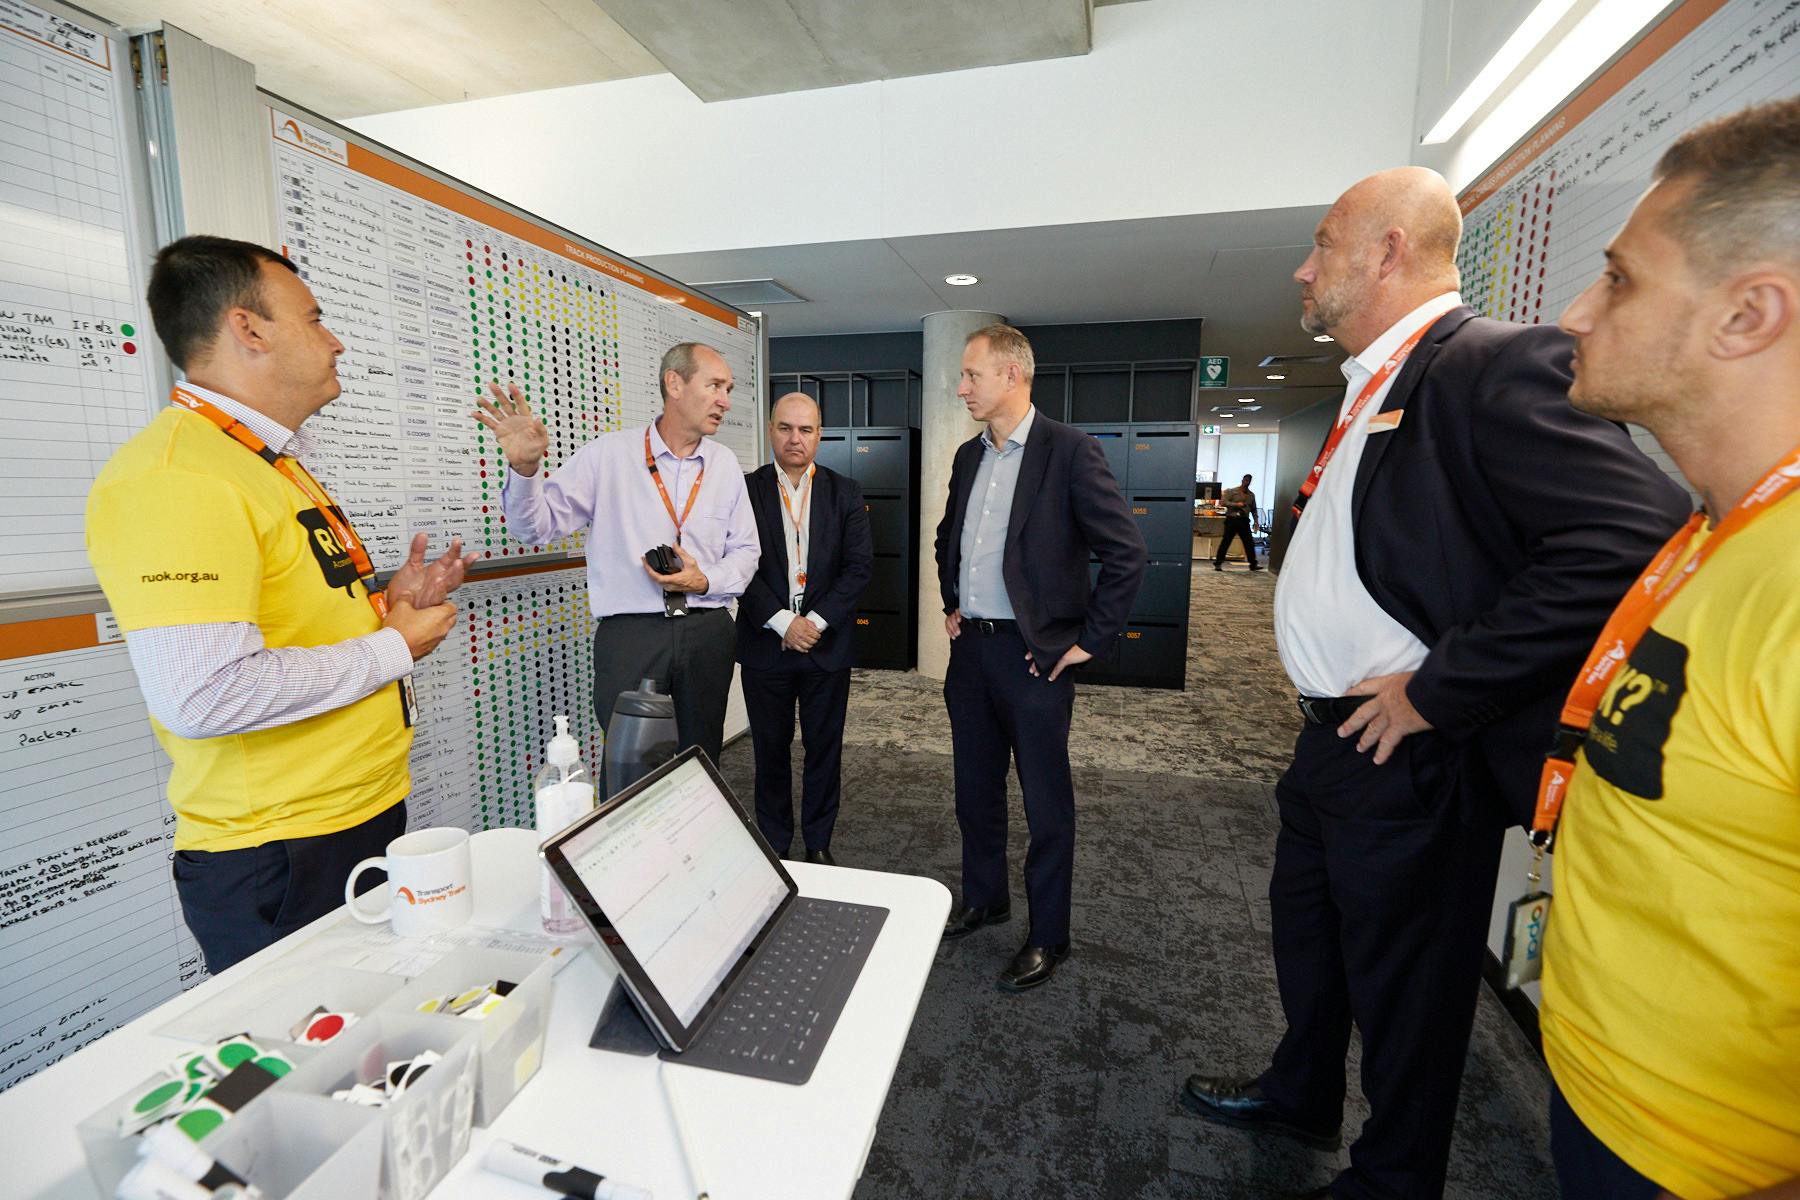 Getting the lowdown with the Sydney Trains team at Clyde